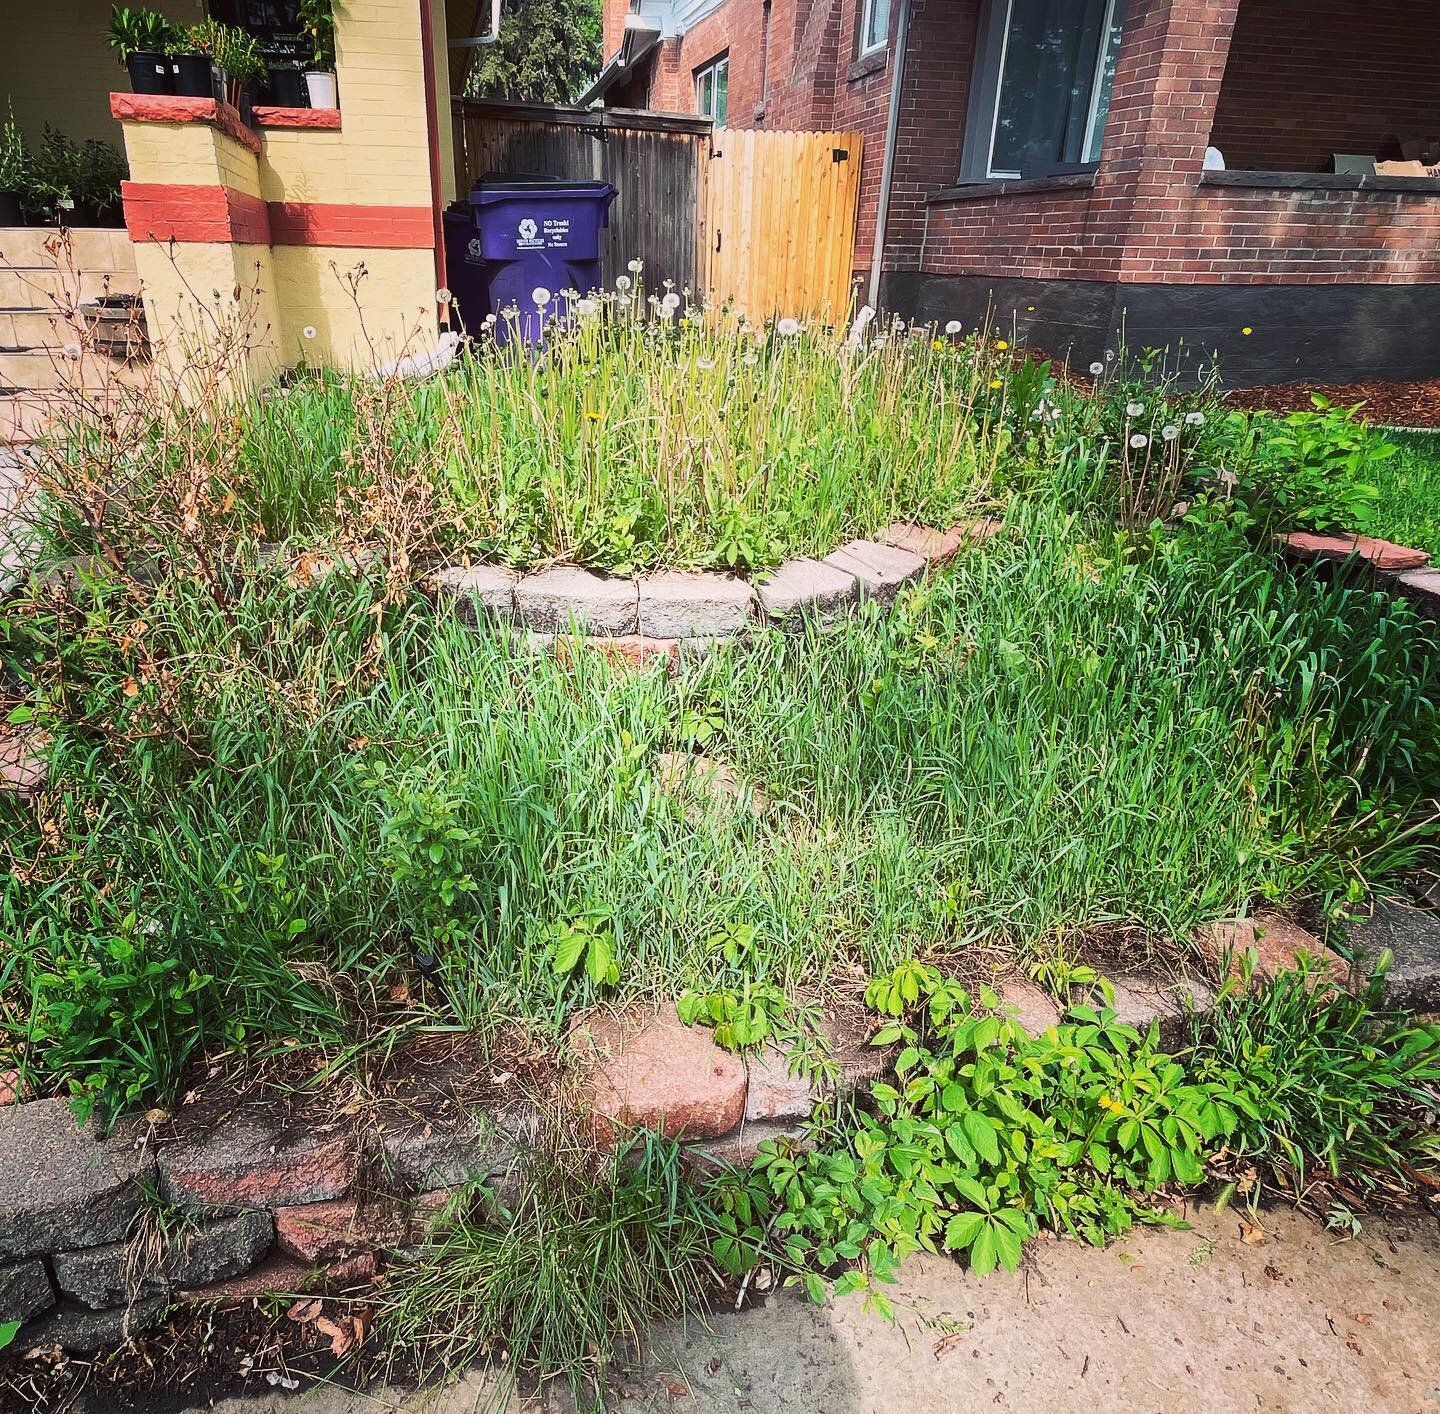 Check out this fun transformation! This weekend we tackled an overgrown front yard and turned it into a xeric paradise. We cleared out pesky weeds and introduced a stunning selection of xeric plants including Russian Sage, Yucca, Tickseed, Penstemon,